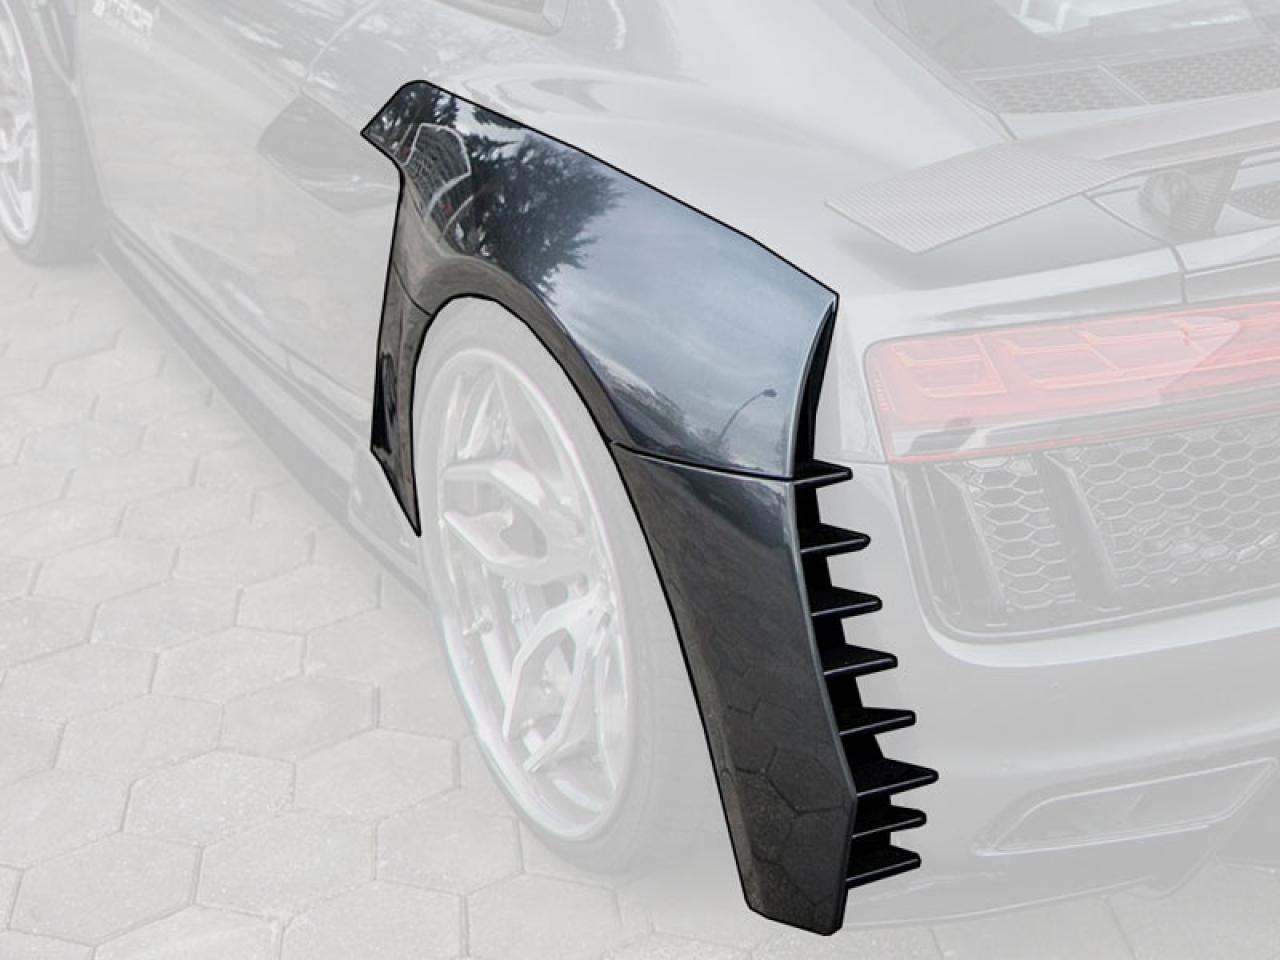 Check our price and buy Prior Design PD800WB body kit for Audi R8 4S Coupe/Spyder!